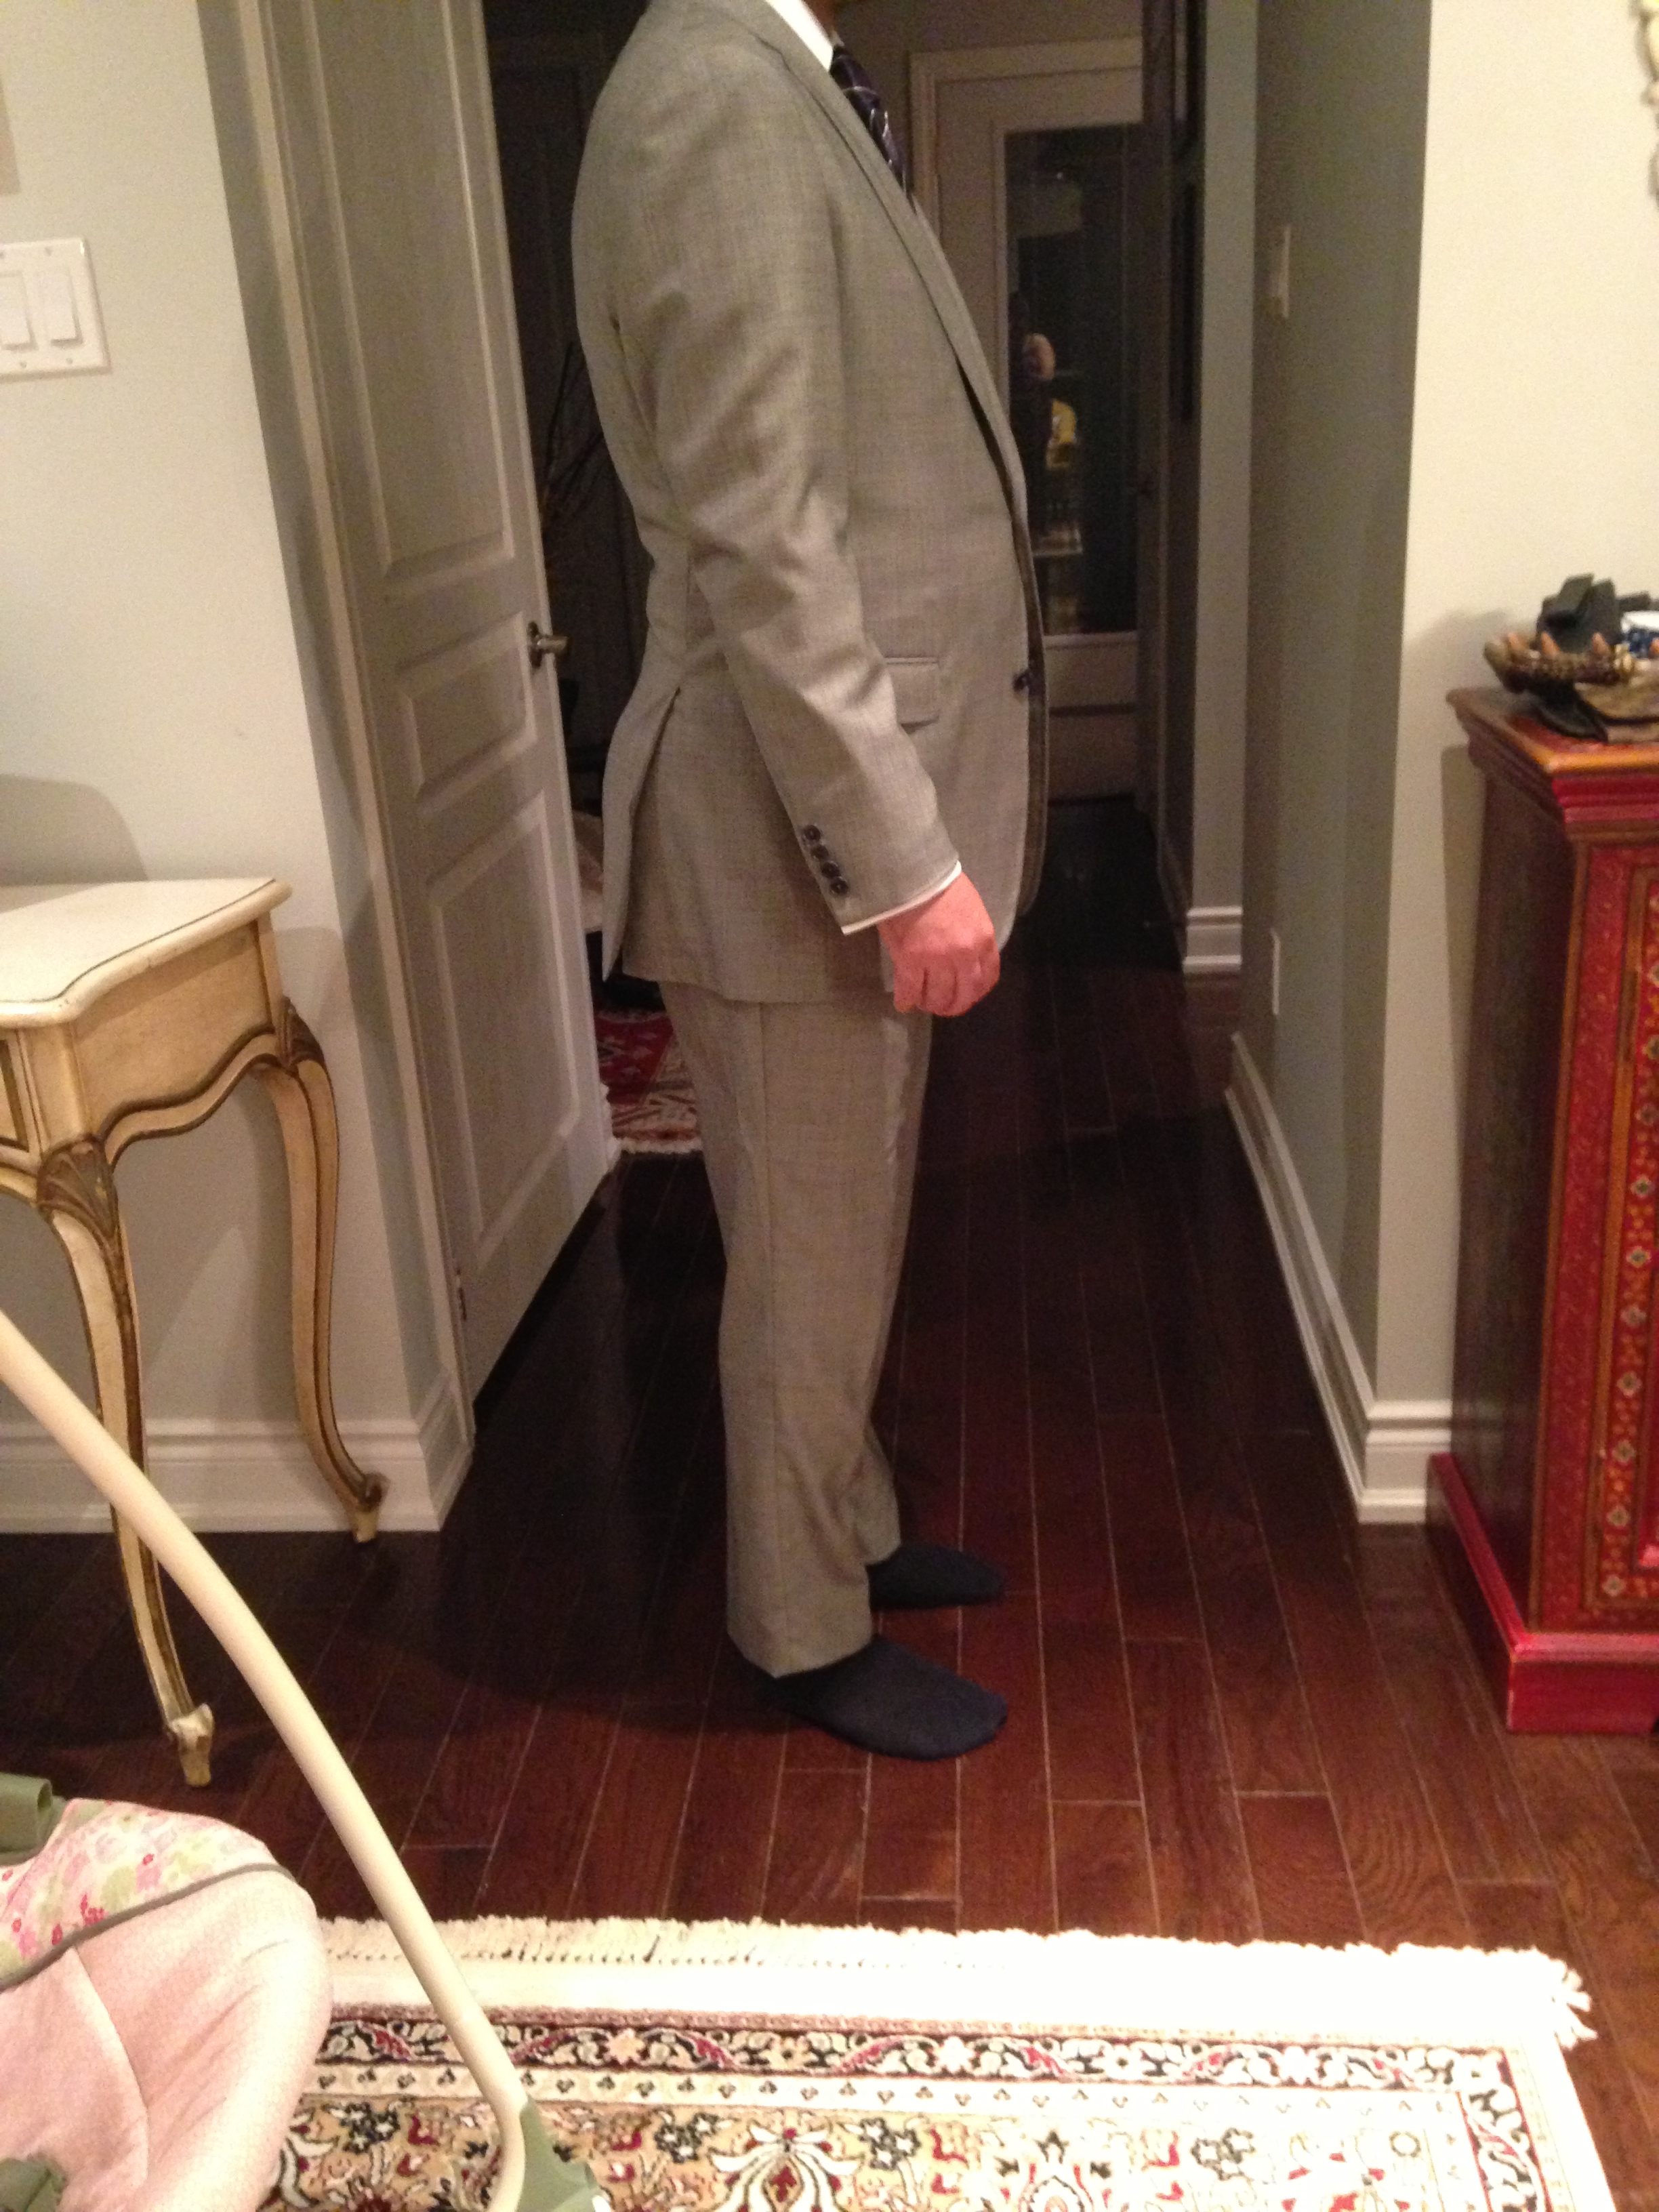 Sean on X: ill fitting suit, Scruffy shoes, no belt. Worrying